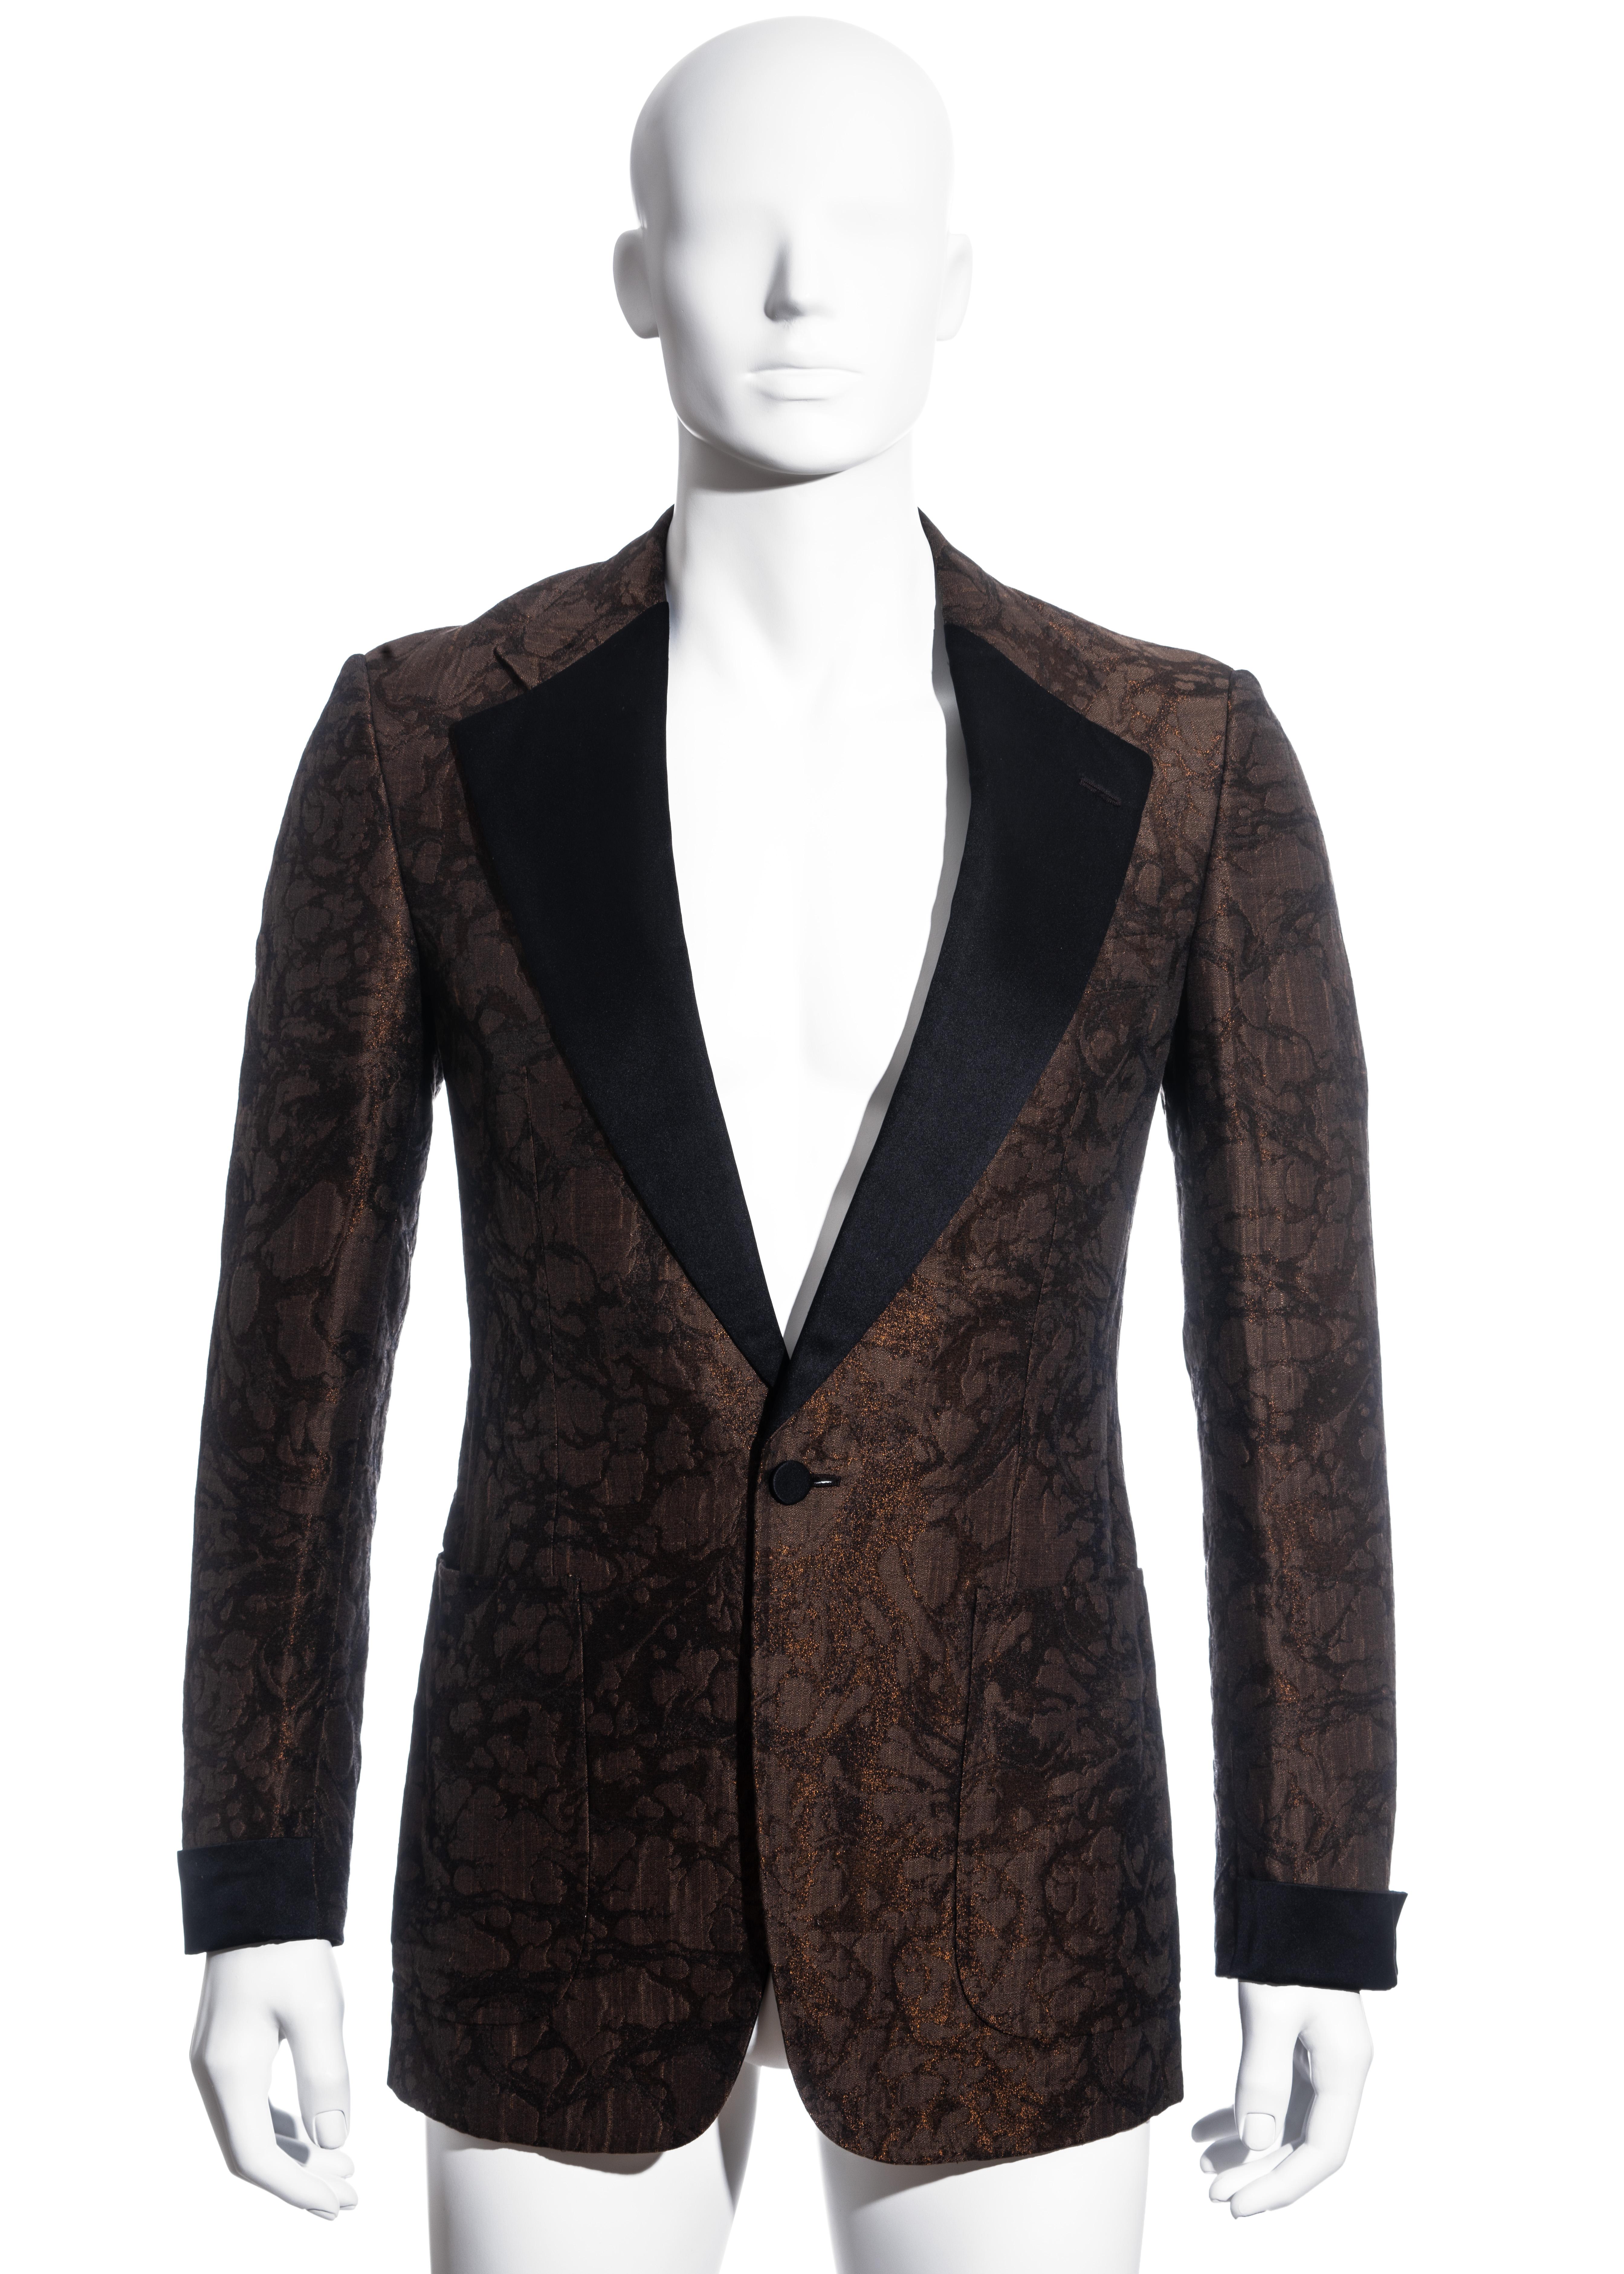 ▪ Men's Gucci bronze jacquard evening blazer jacket
▪ Marbled effect
▪ Black silk lapels and cuffs
▪ Single-breasted 
▪ Silk lining
▪ Size 46
▪ Spring-Summer 2005